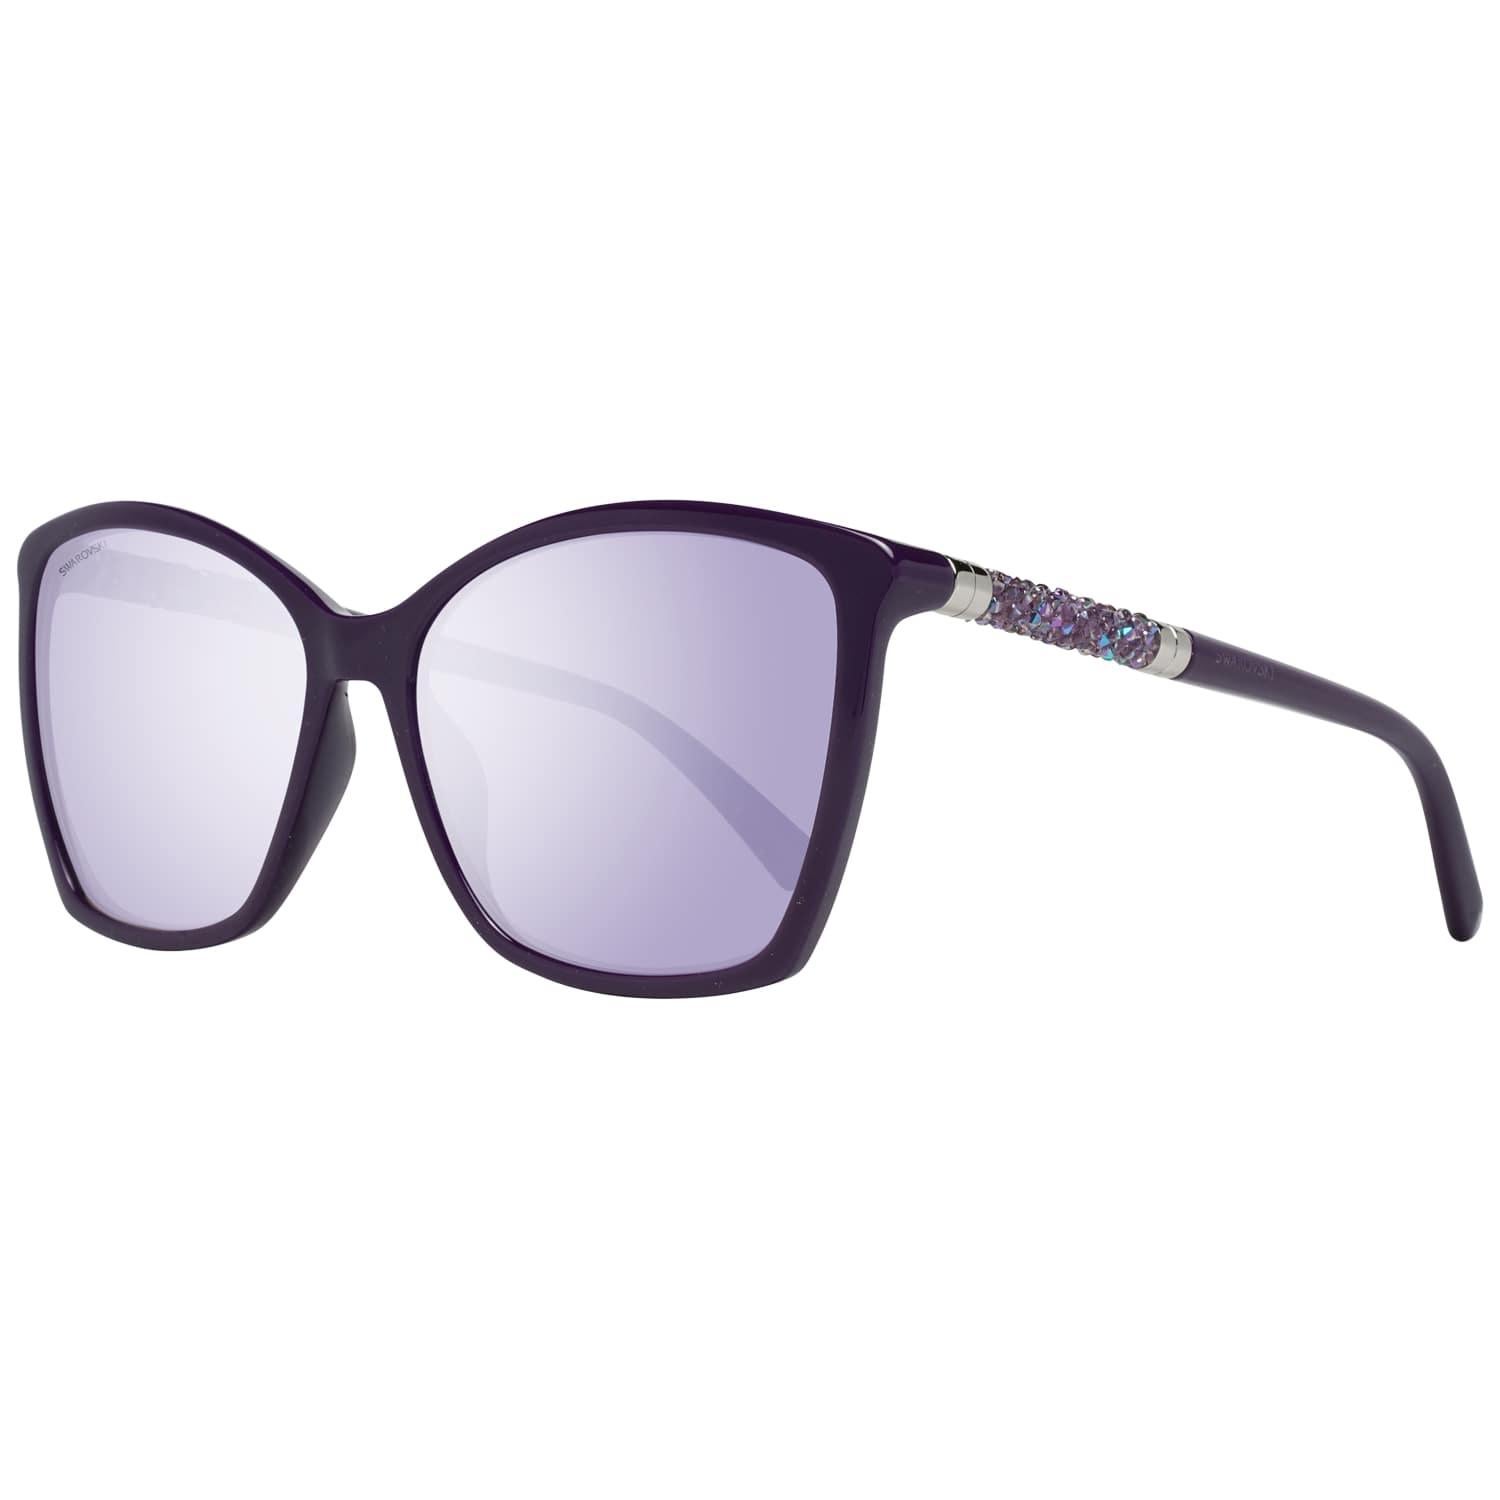 DetailsMATERIAL: AcetateCOLOR: PurpleMODEL: SK0148 5683ZGENDER: WomenCOUNTRY OF MANUFACTURE: ChinaTYPE: SunglassesORIGINAL CASE?: YesSTYLE: ButterflyOCCASION: CasualFEATURES: LightweightLENS COLOR: PurpleLENS TECHNOLOGY: MirroredYEAR MANUFACTURED: